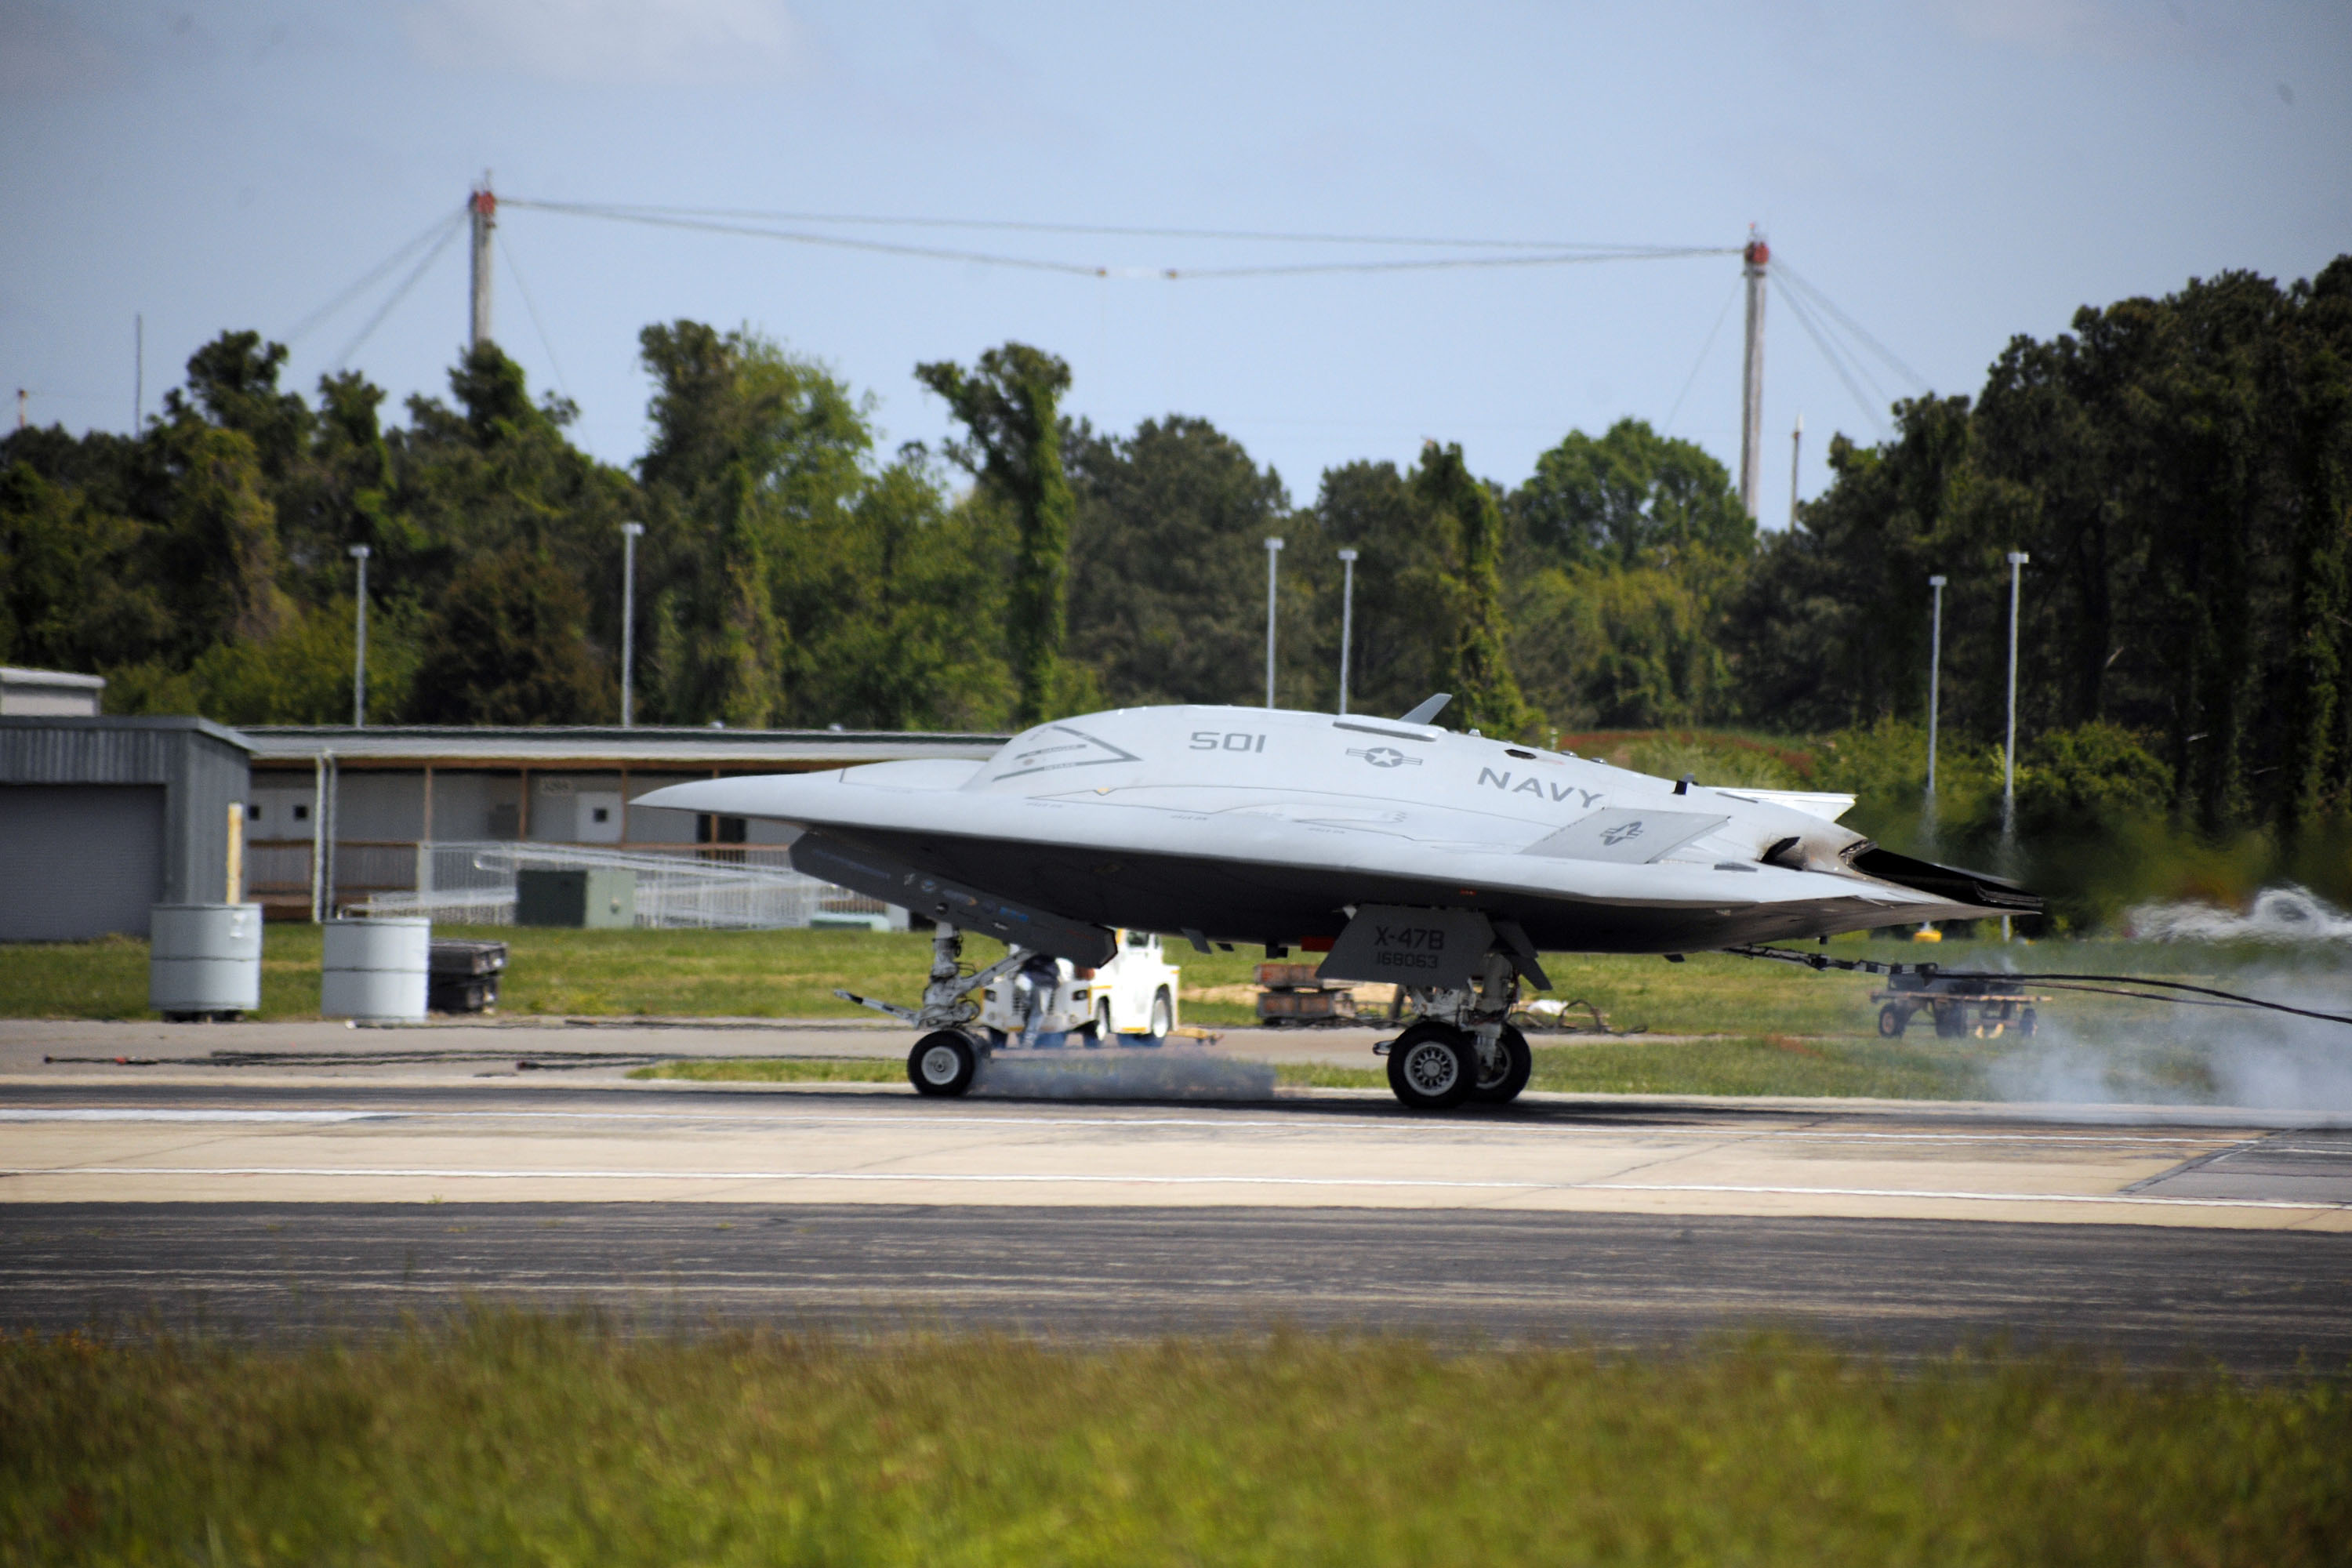 U.S. Navy Completes First Arrested Unmanned Aircraft Landing